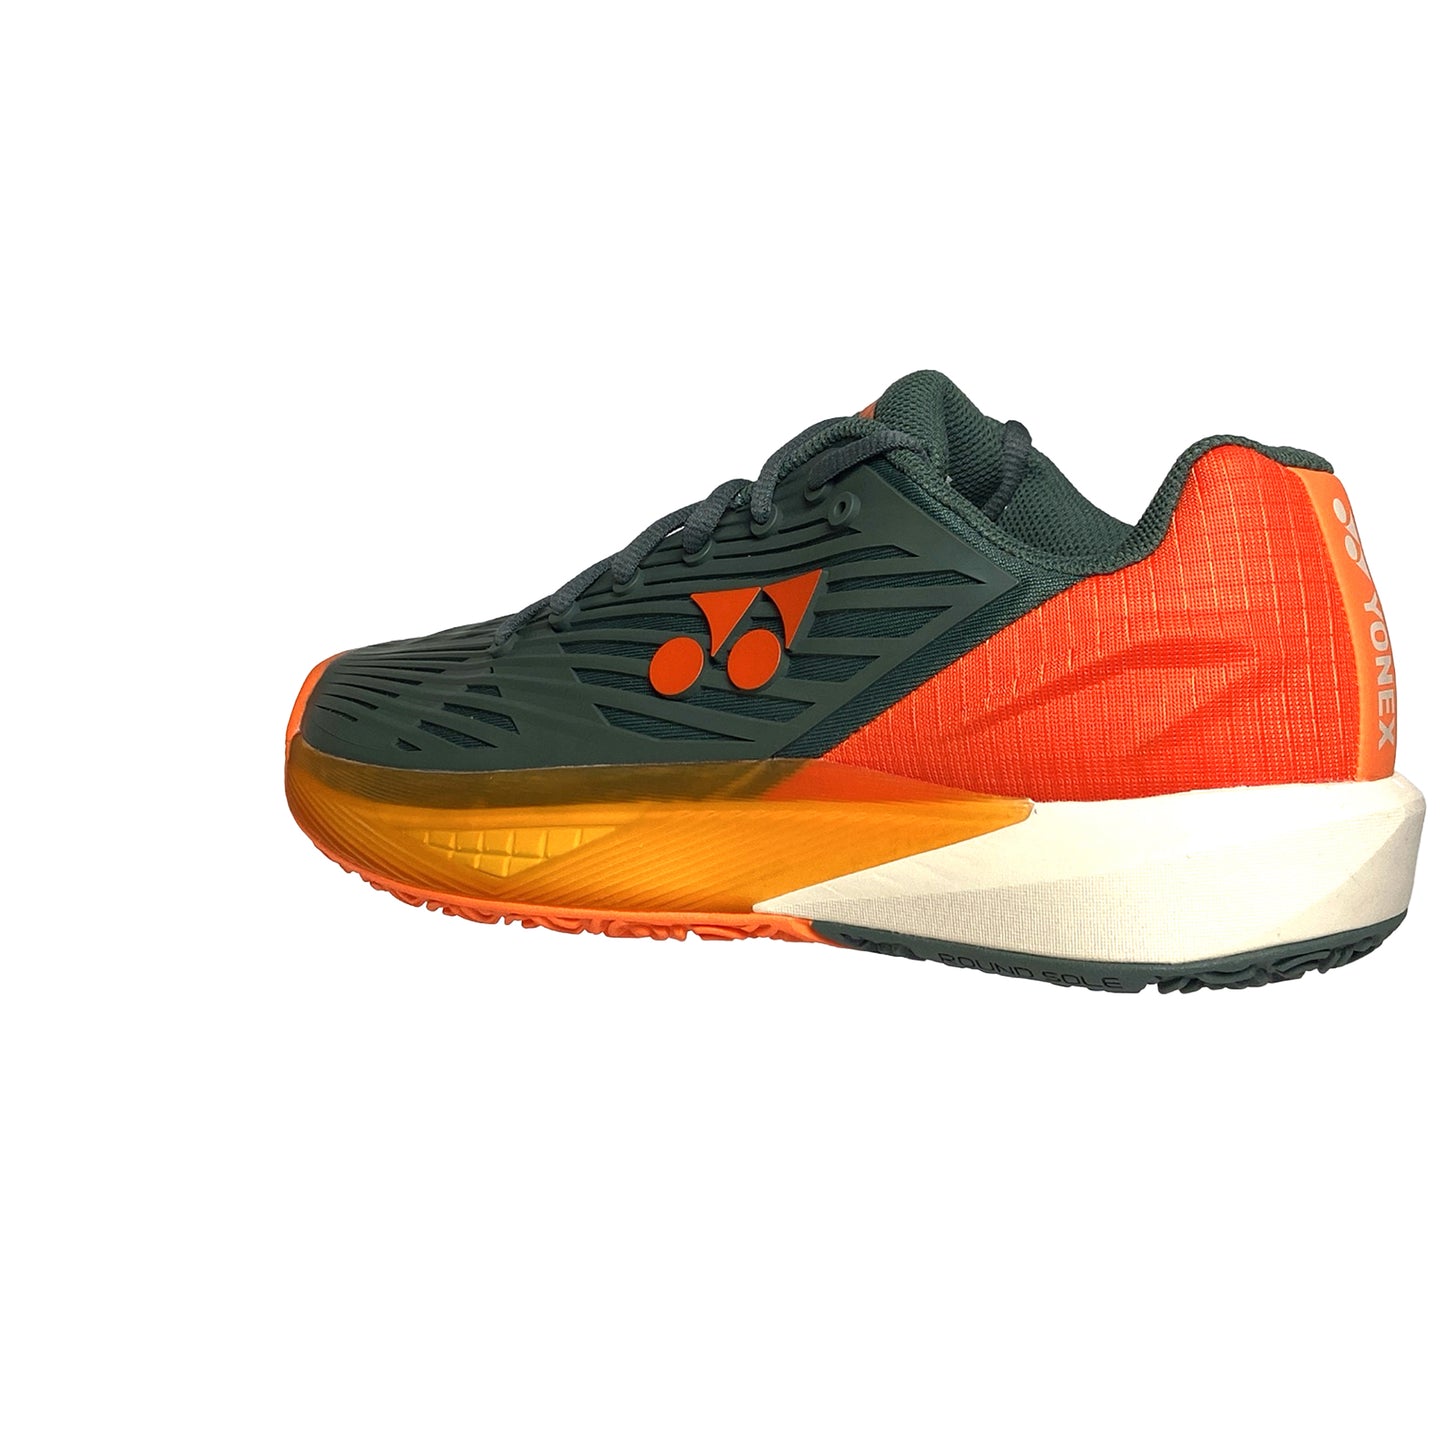 Yonex Homme Power Cushion Eclipsion 5 CLAY Olive